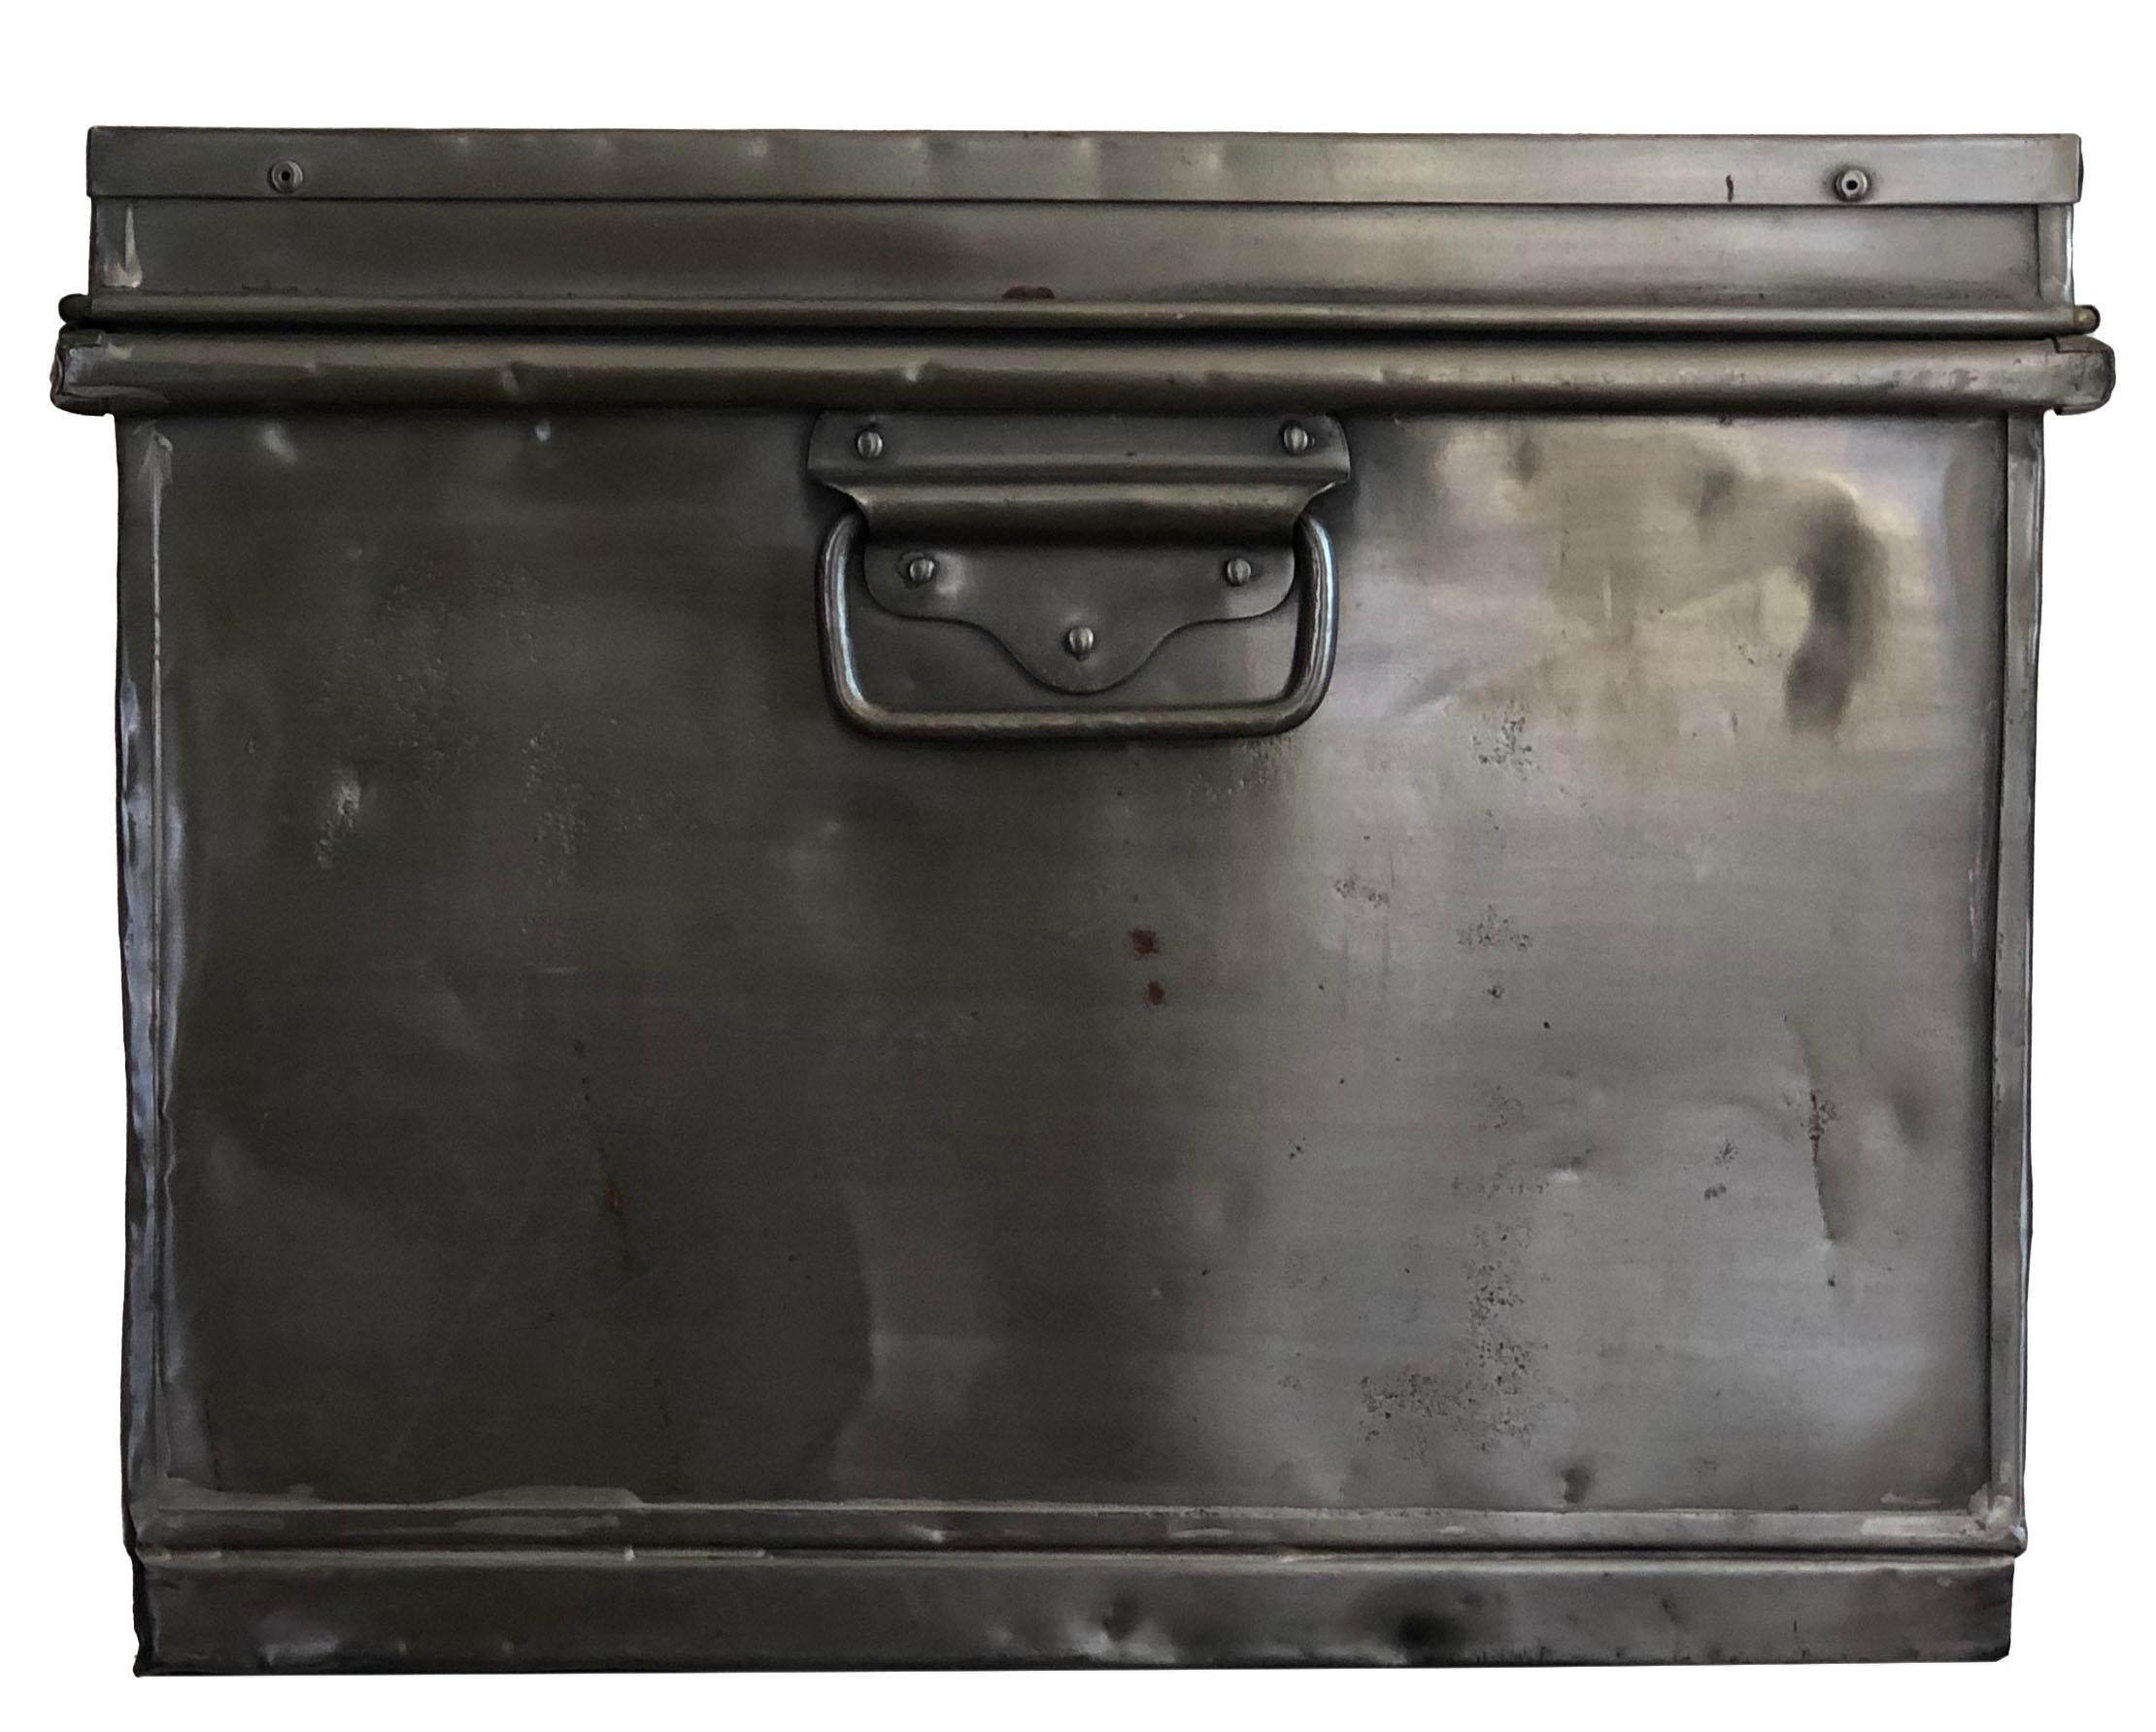 Vintage antique metal trunk chest with beautiful brass hardware and a brass plaque on the too center. Bluish painting on the interior. I can imagine that this trunk had a special purpose with its original owner and has seen a lot of the world.